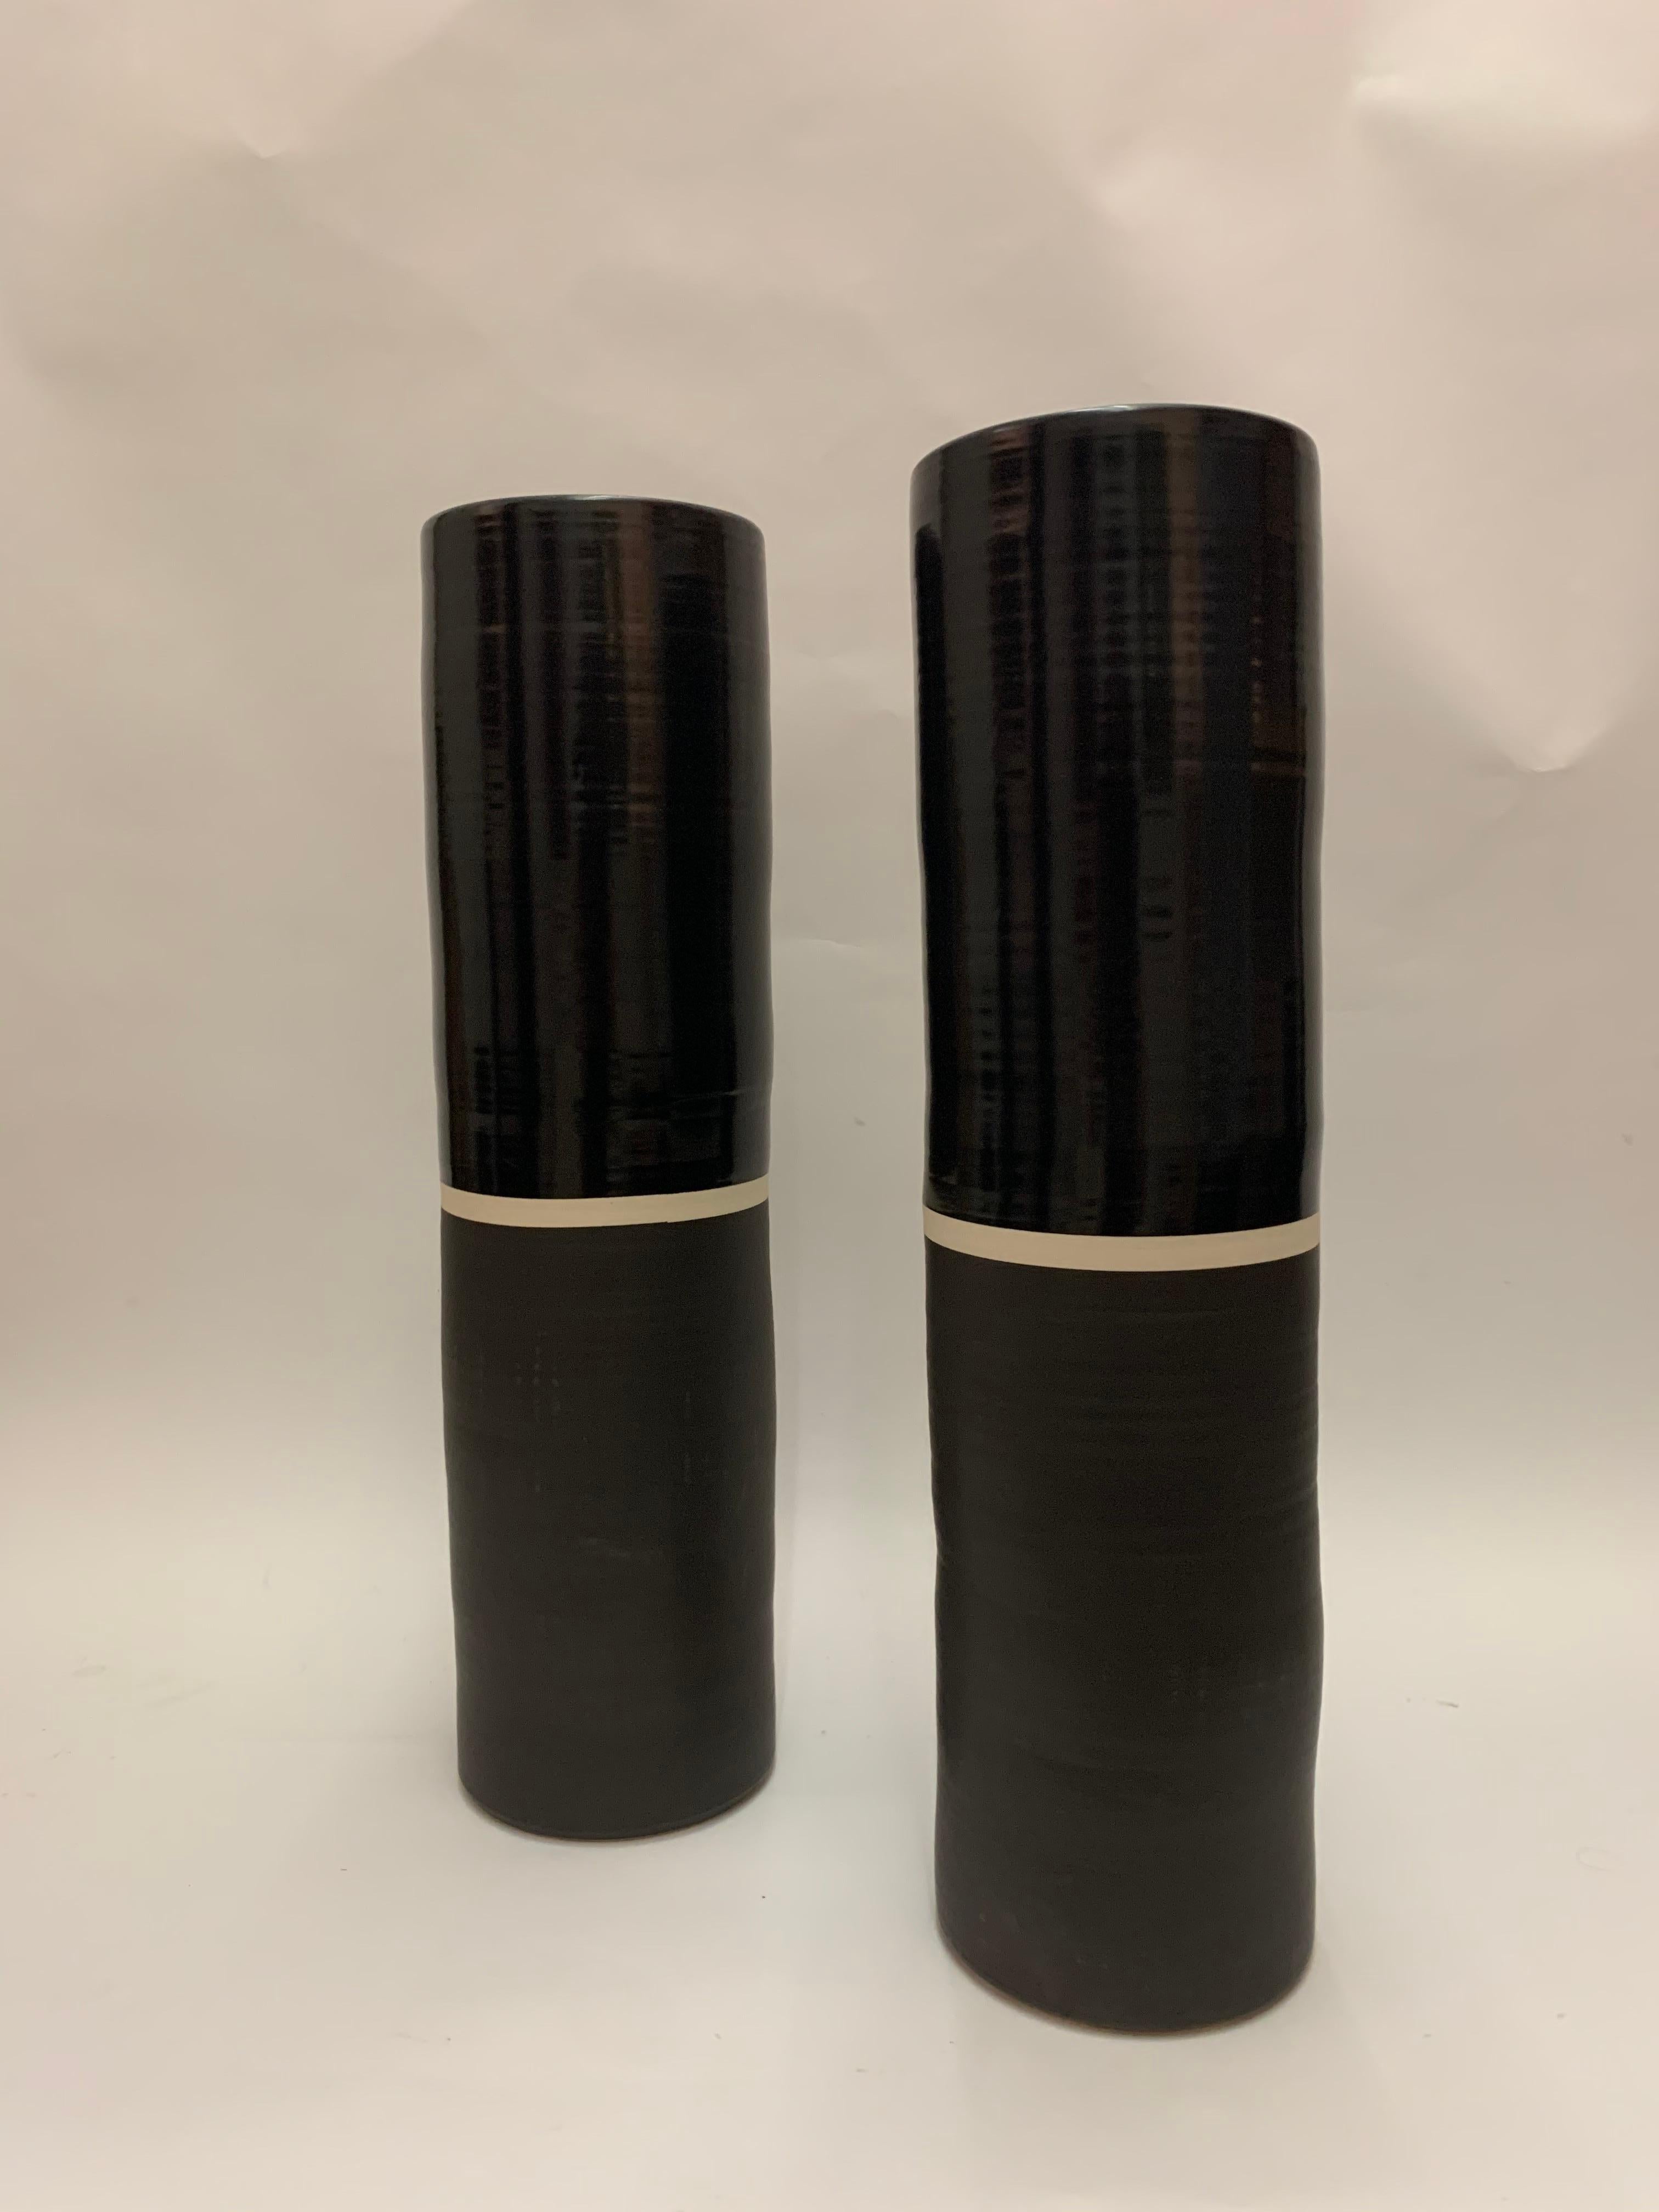 Pair of Minimalist ceramic vases by esteemed designer Calvin Klein from his eponymous home collection. Using two different style paint techniques the vases have a lacquer top and matte base with a white band creating space in the middle.

Property